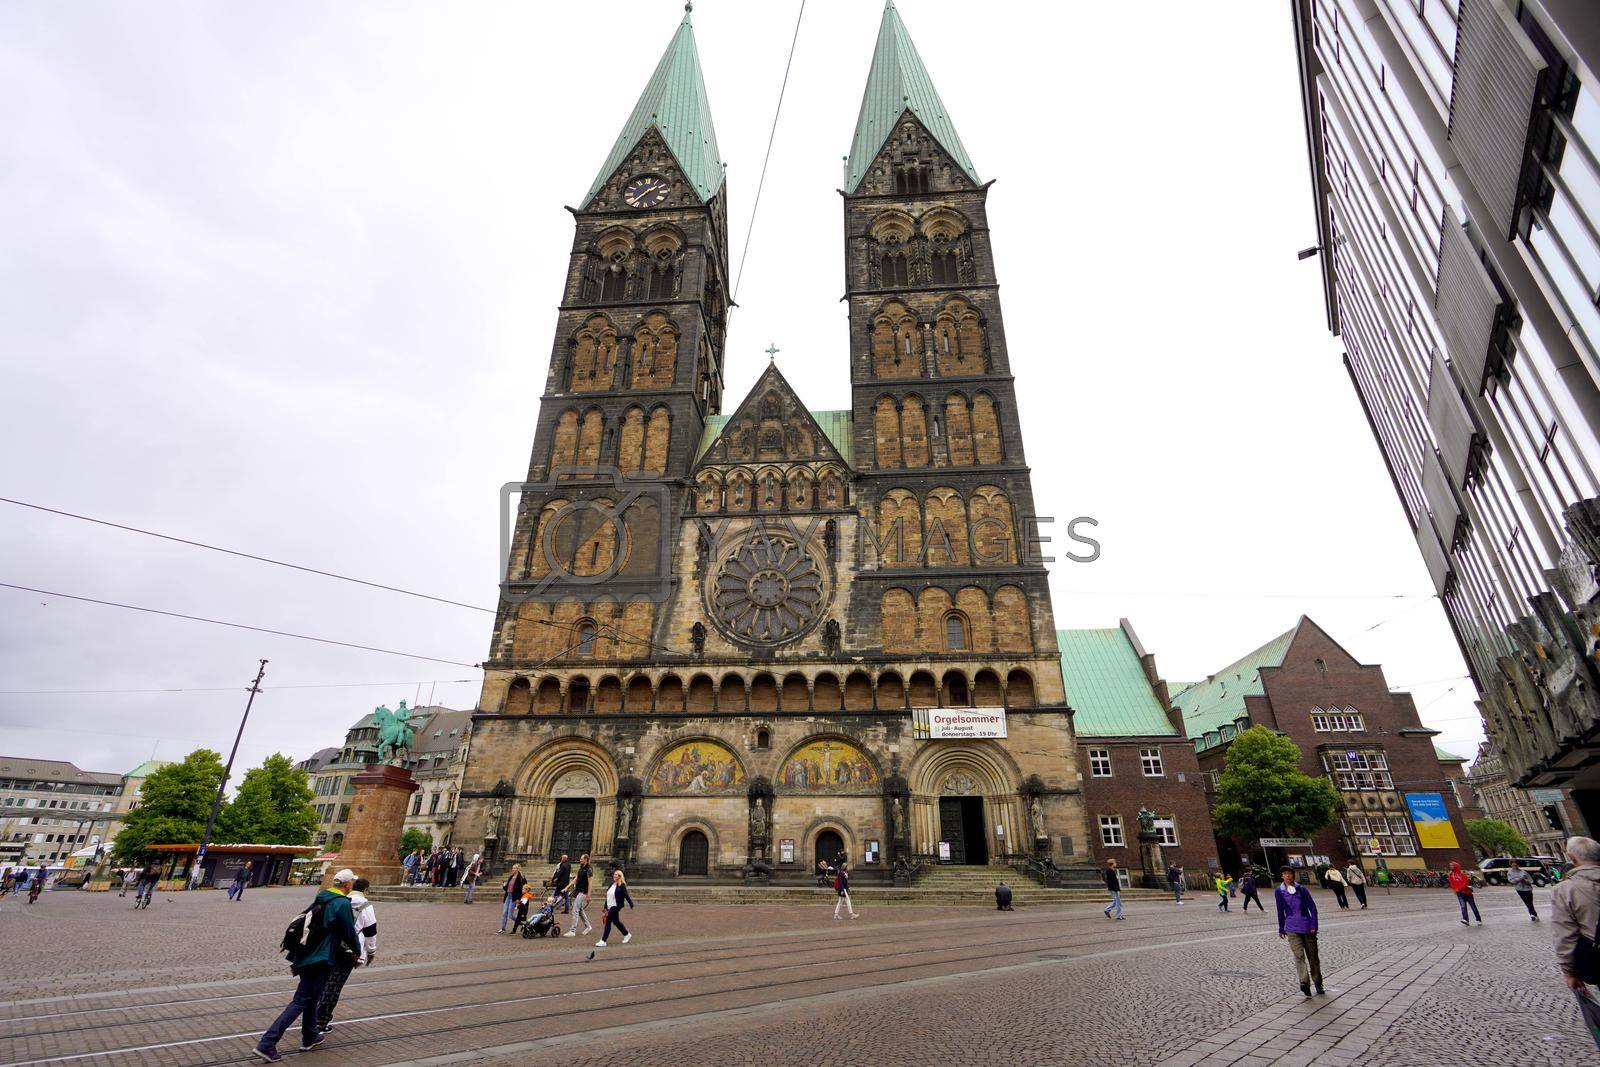 BREMEN, GERMANY - JULY, 7 2022: Bremen Cathedral dedicated to St. Peter, is a church situated in the market square in the center of Bremen, Germany